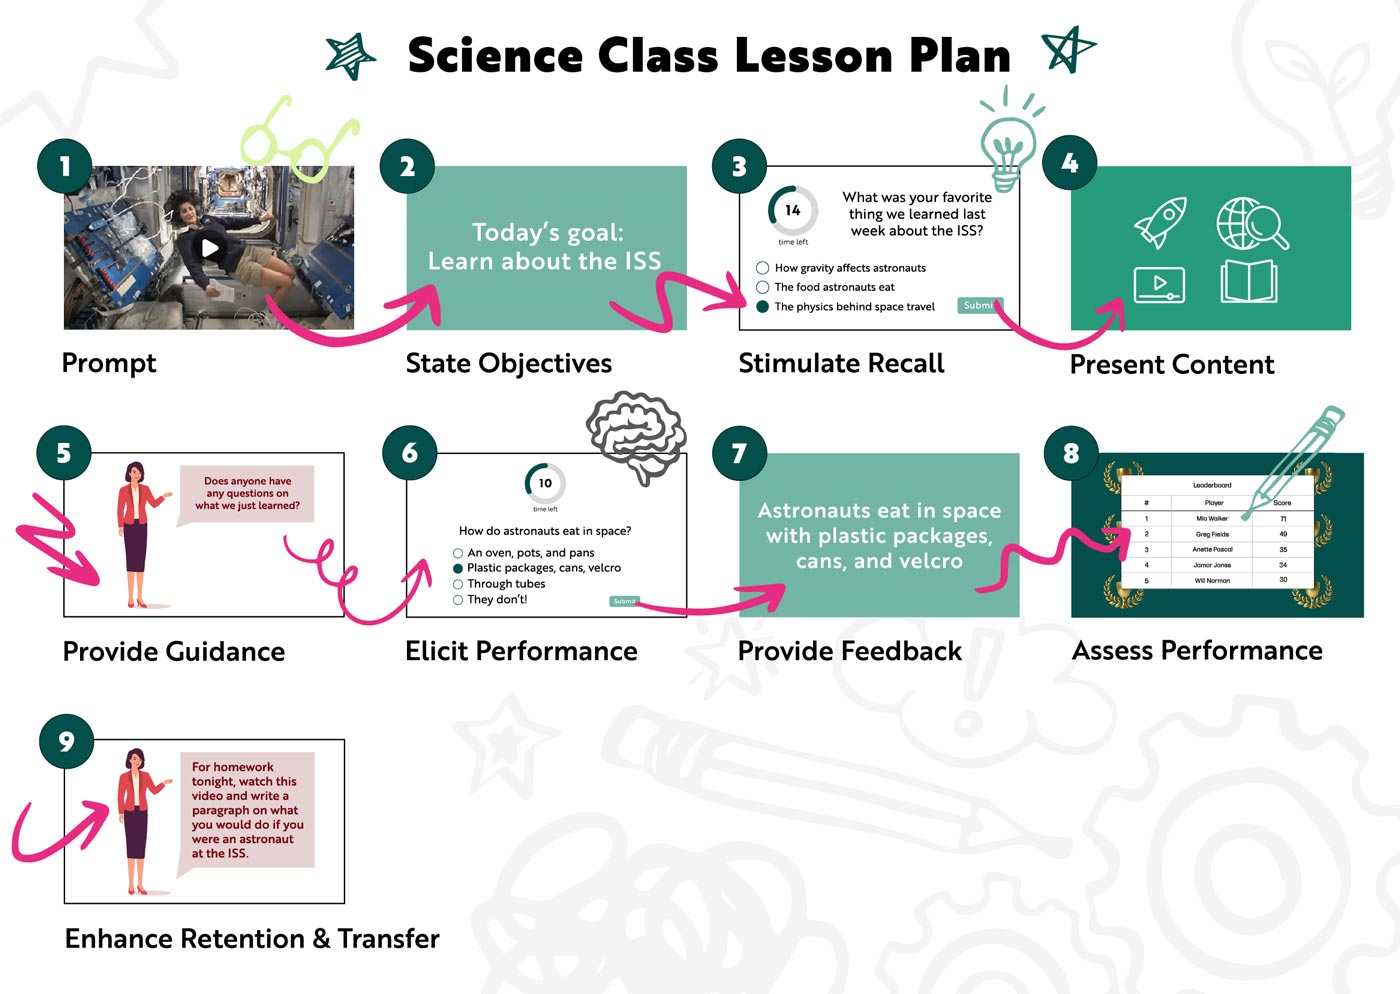 An example science class lesson plan using Gagné's 9 Events of Instruction.